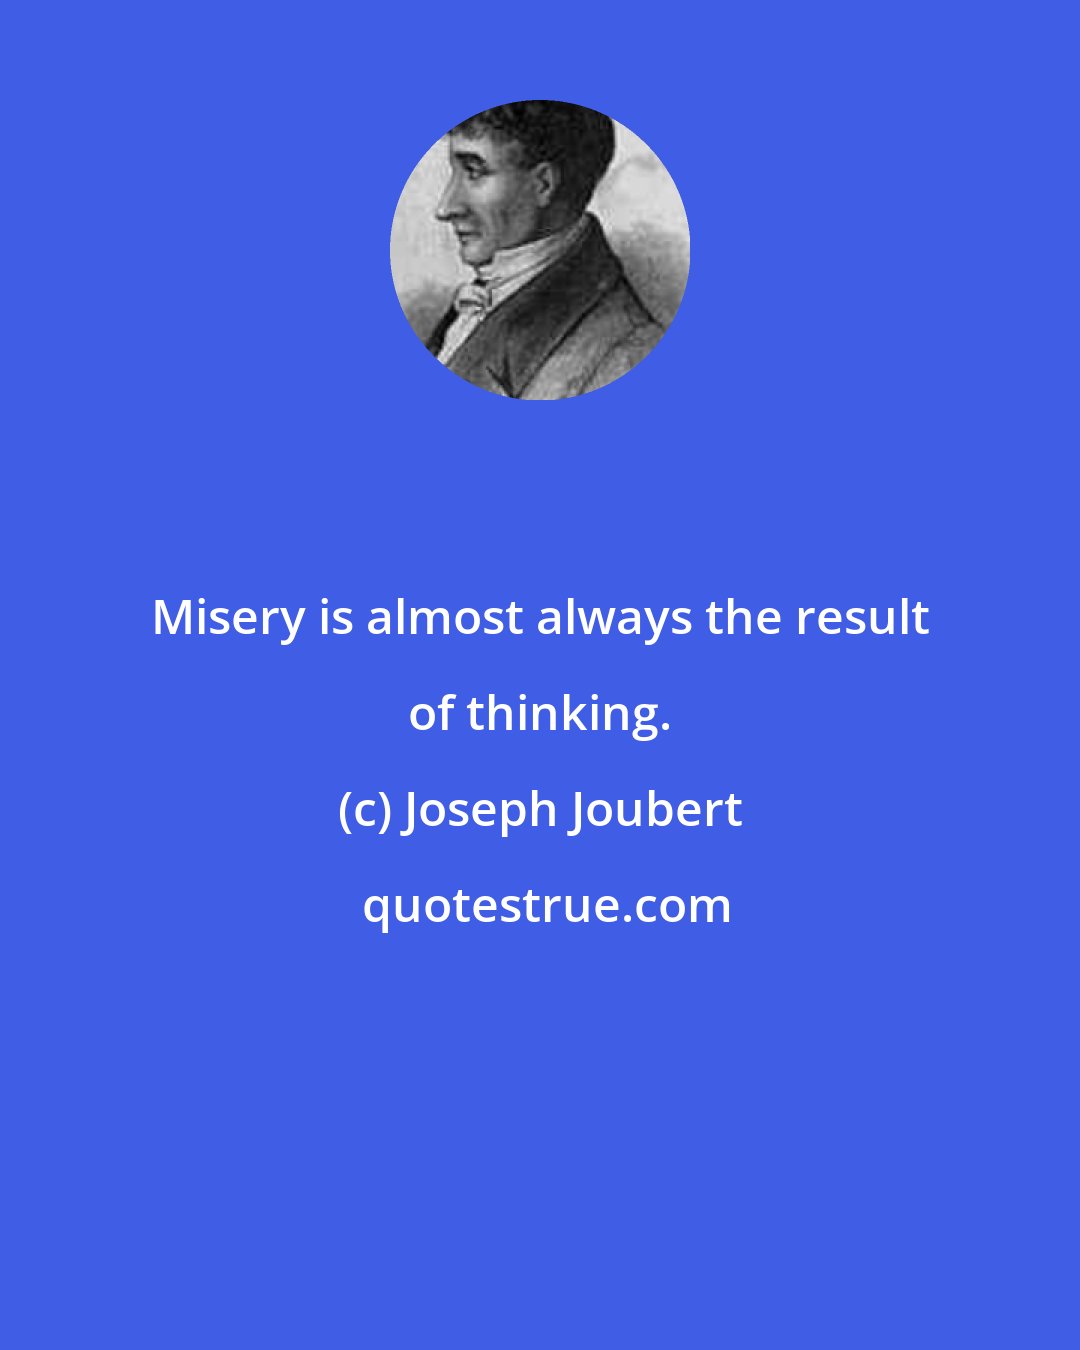 Joseph Joubert: Misery is almost always the result of thinking.